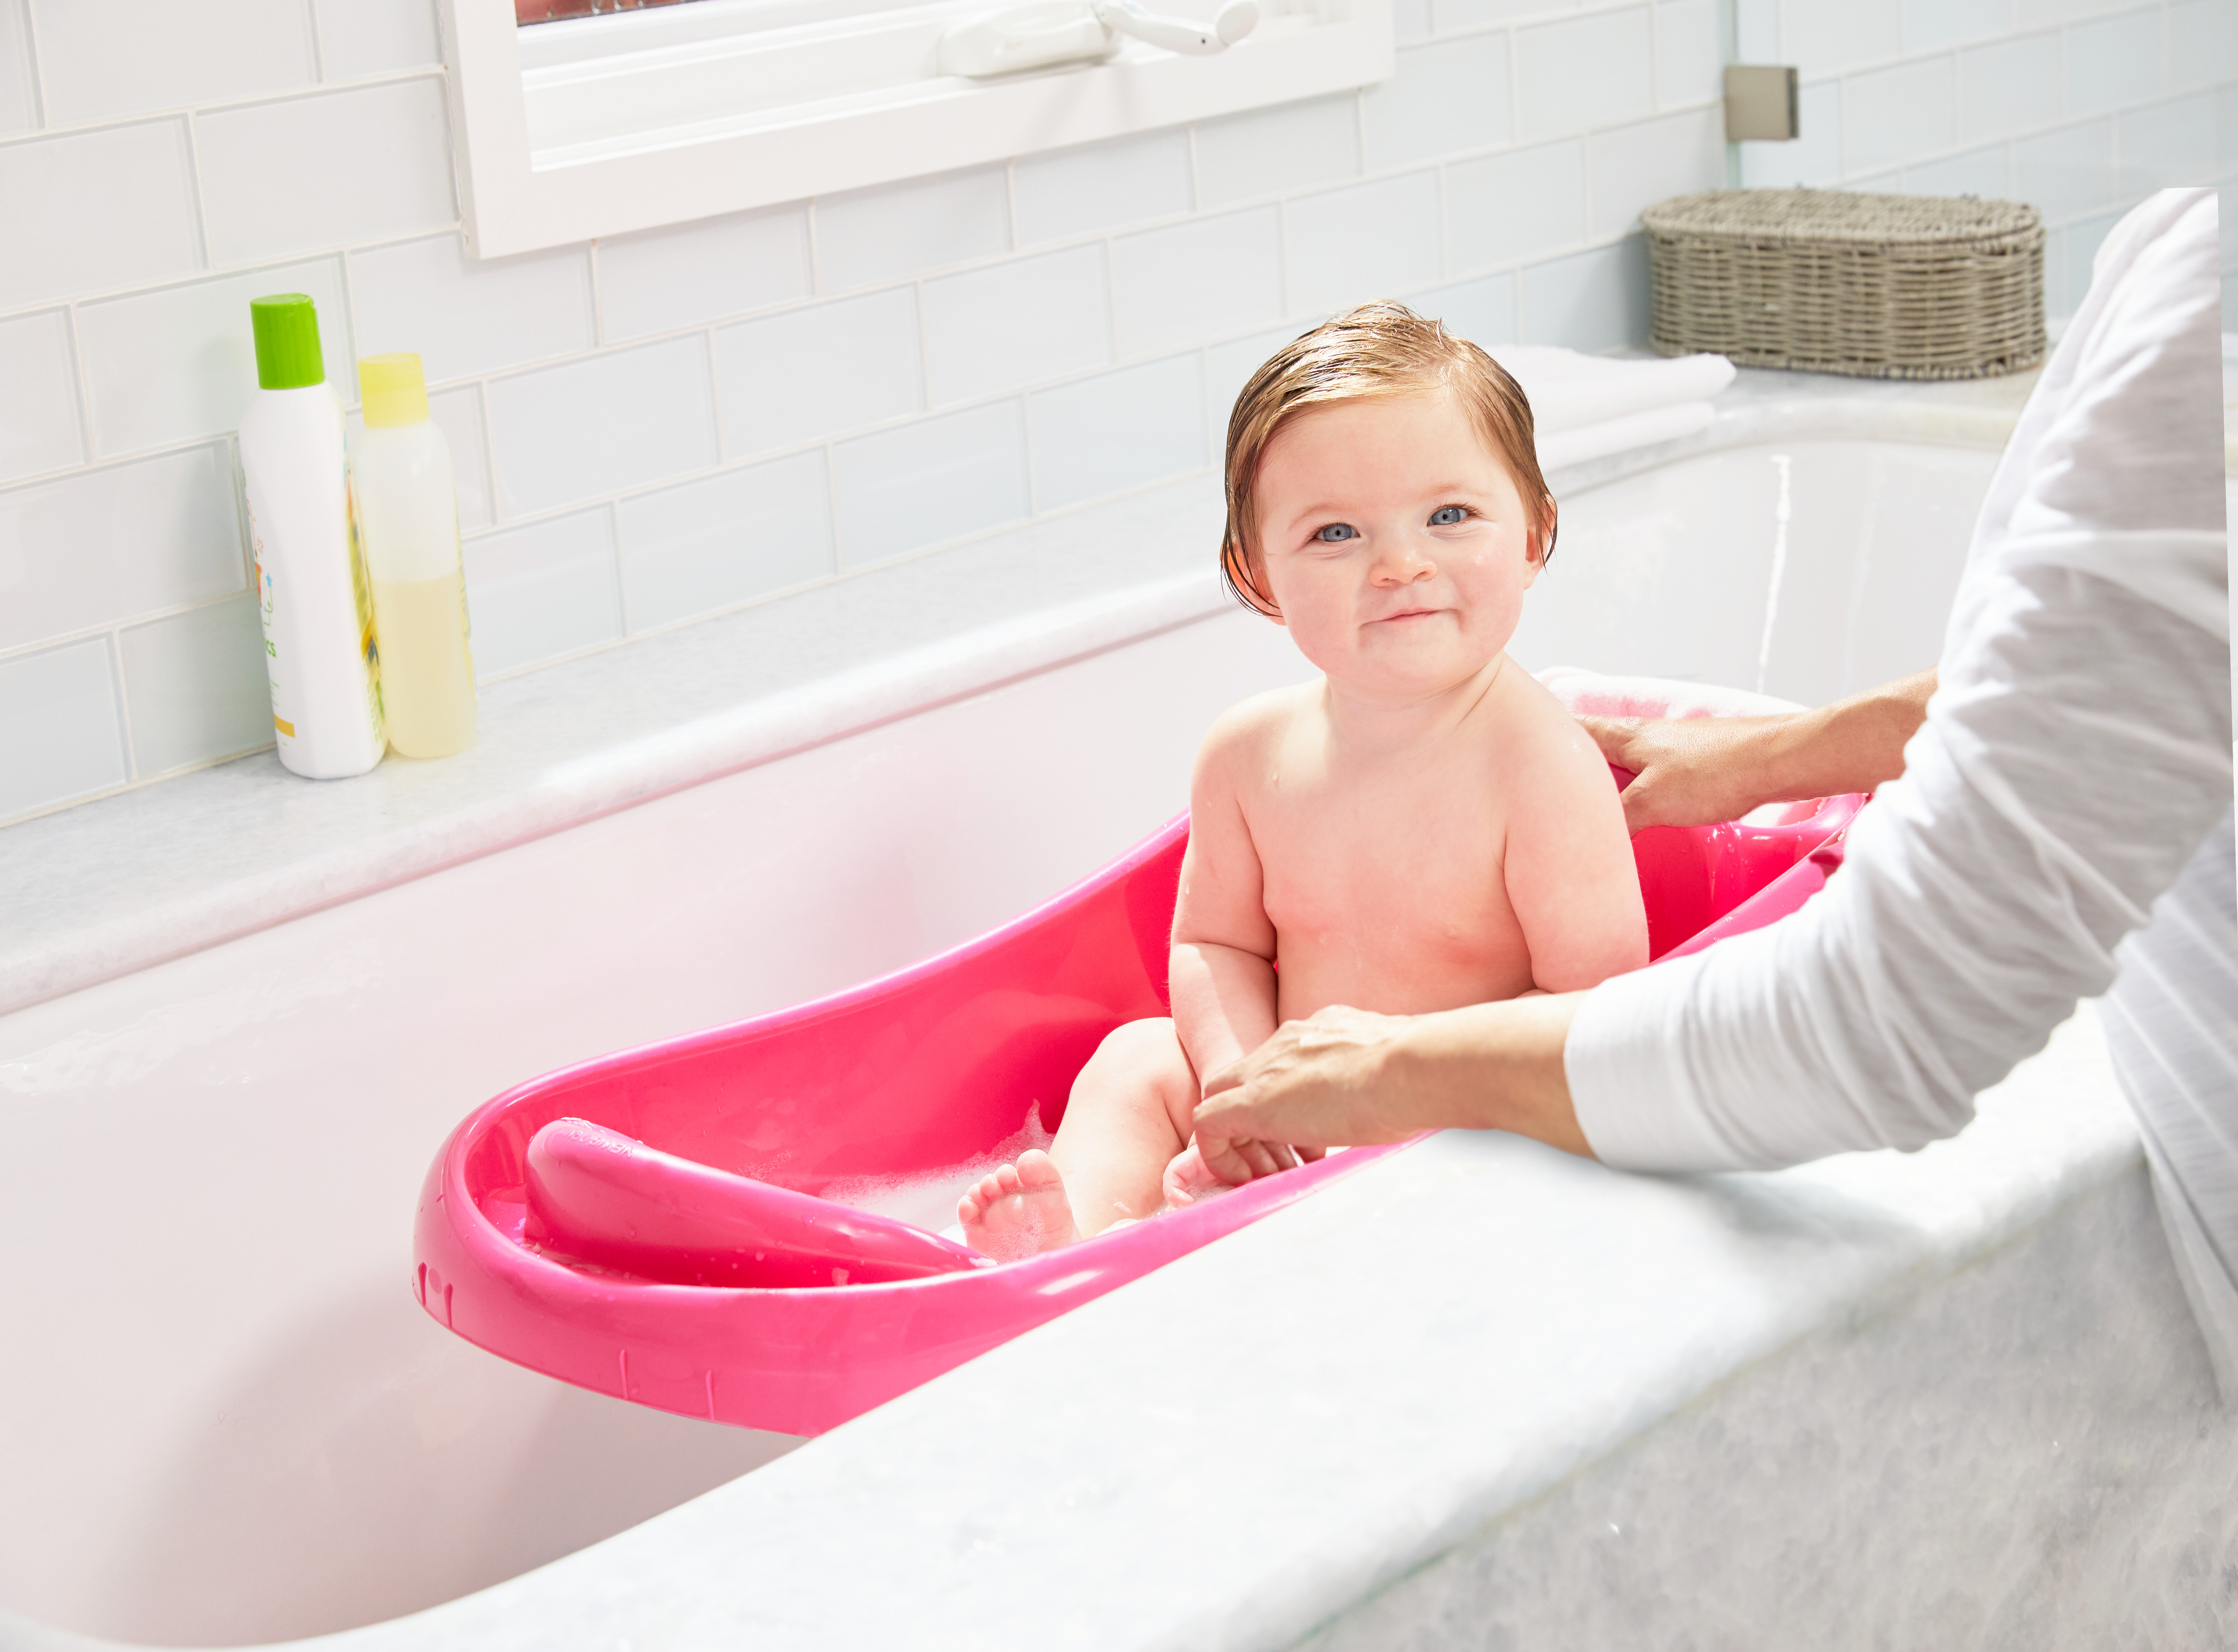 The First Years Y7135 Sure Comfort Deluxe Newborn To Toddler Tub Pink - image 2 of 7